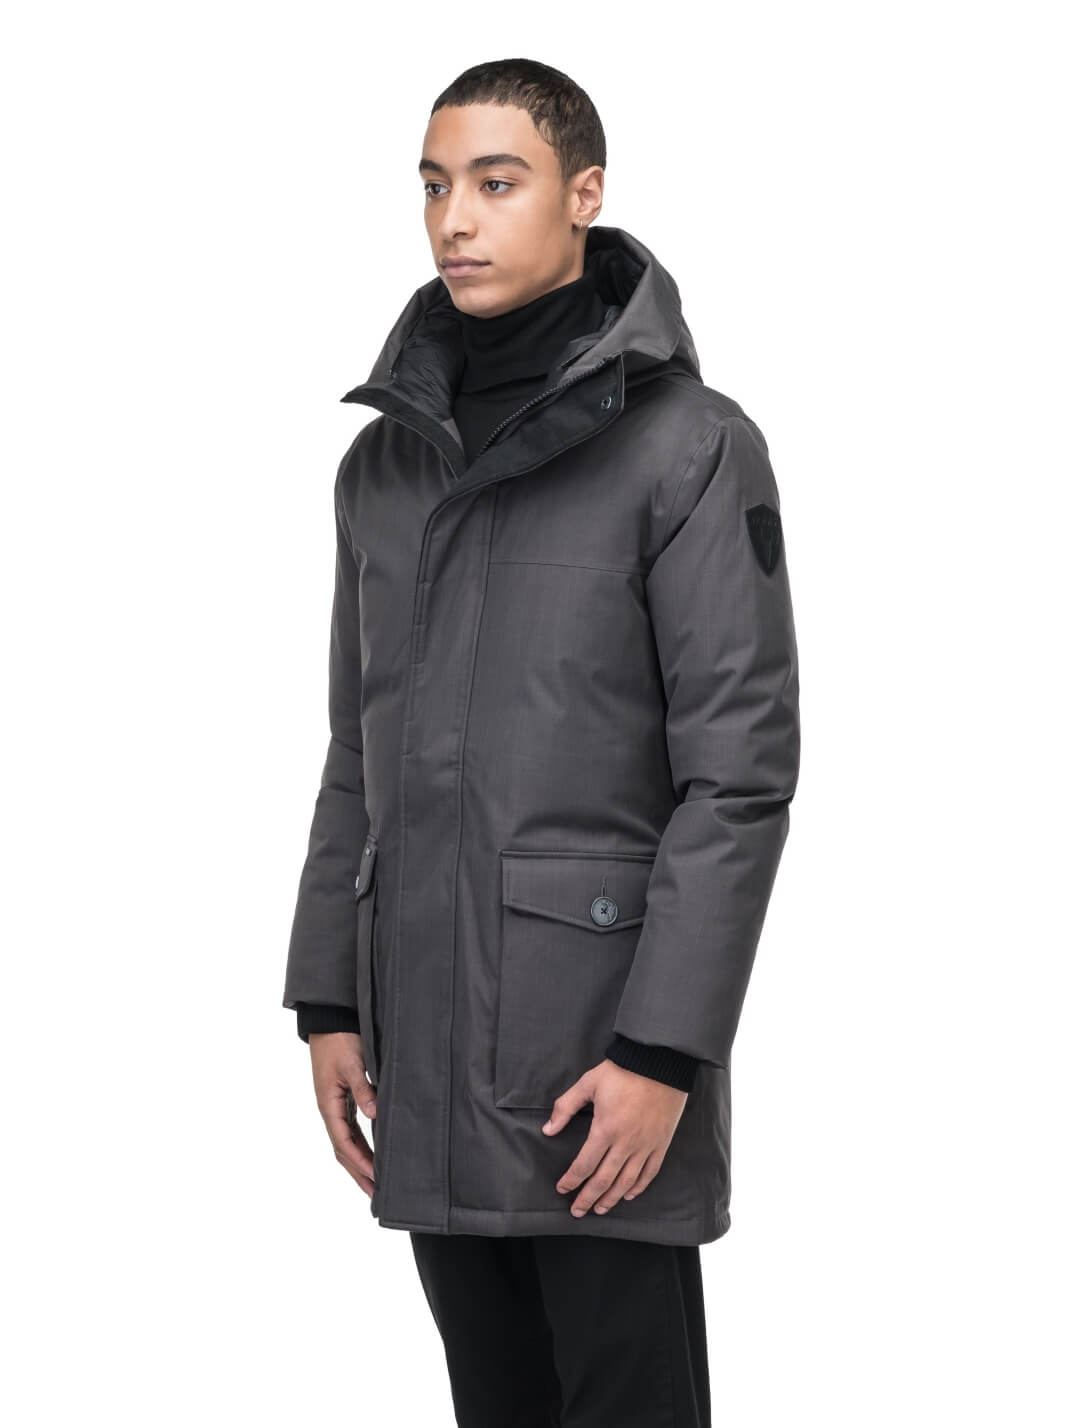 Yves Furless Men's Parka in thigh length, Canadian white duck down insulation, non-removable down-filled hood, flap pockets at waist, centre-front two-way zipper with magnetic wind flap, and elastic ribbed cuffs, in CH Steel Grey